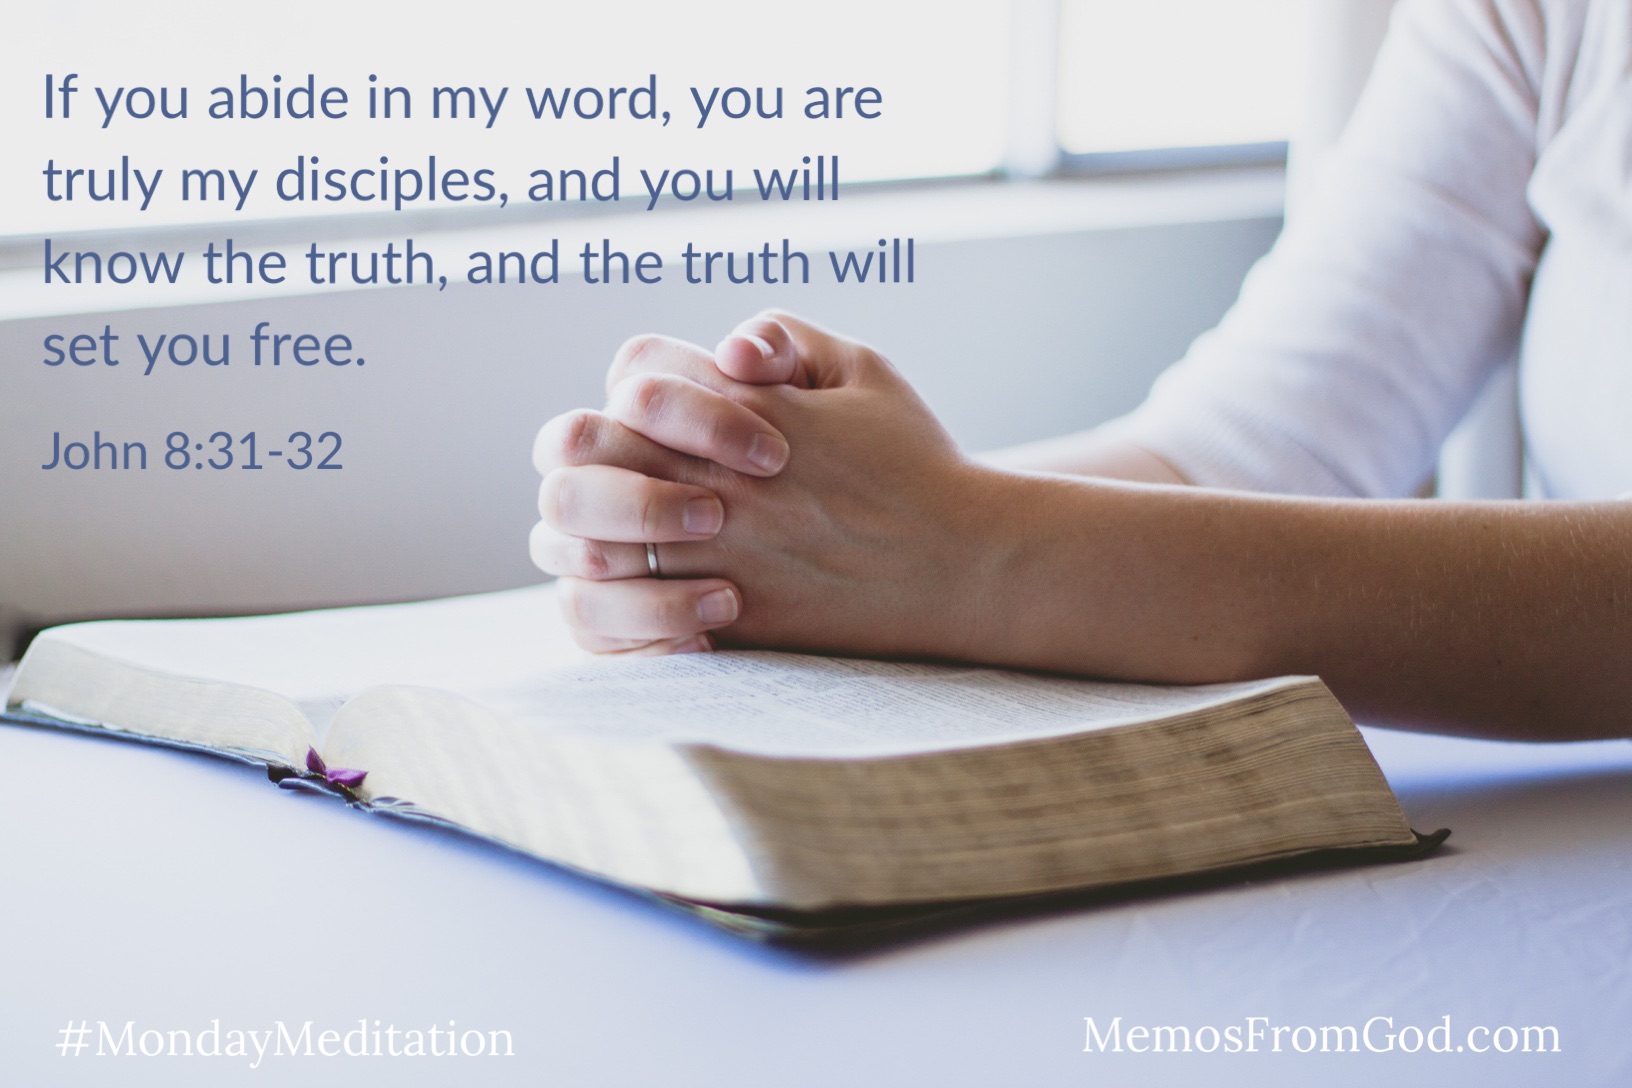 A woman sits with her hands clasped over an open Bible. Caption: If you abide in my word, you are truly my disciples, and you will know the truth, and the truth will set you free. John 8:31-32